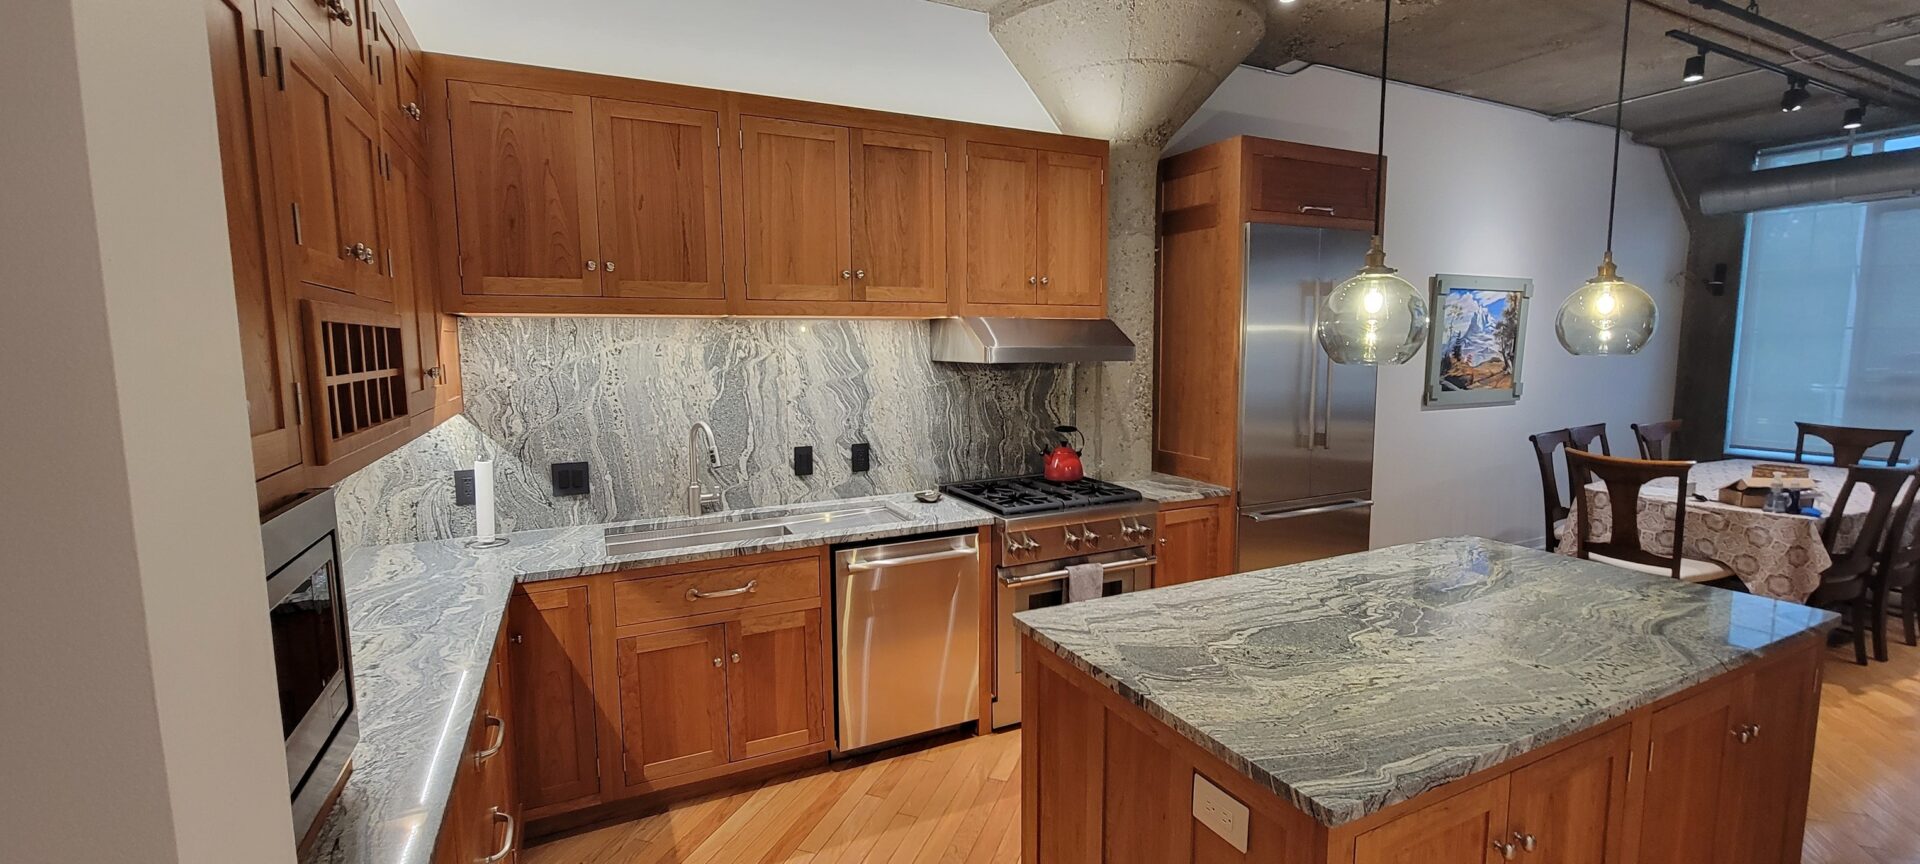 A kitchen with Cherry cabinets and granite counter tops.